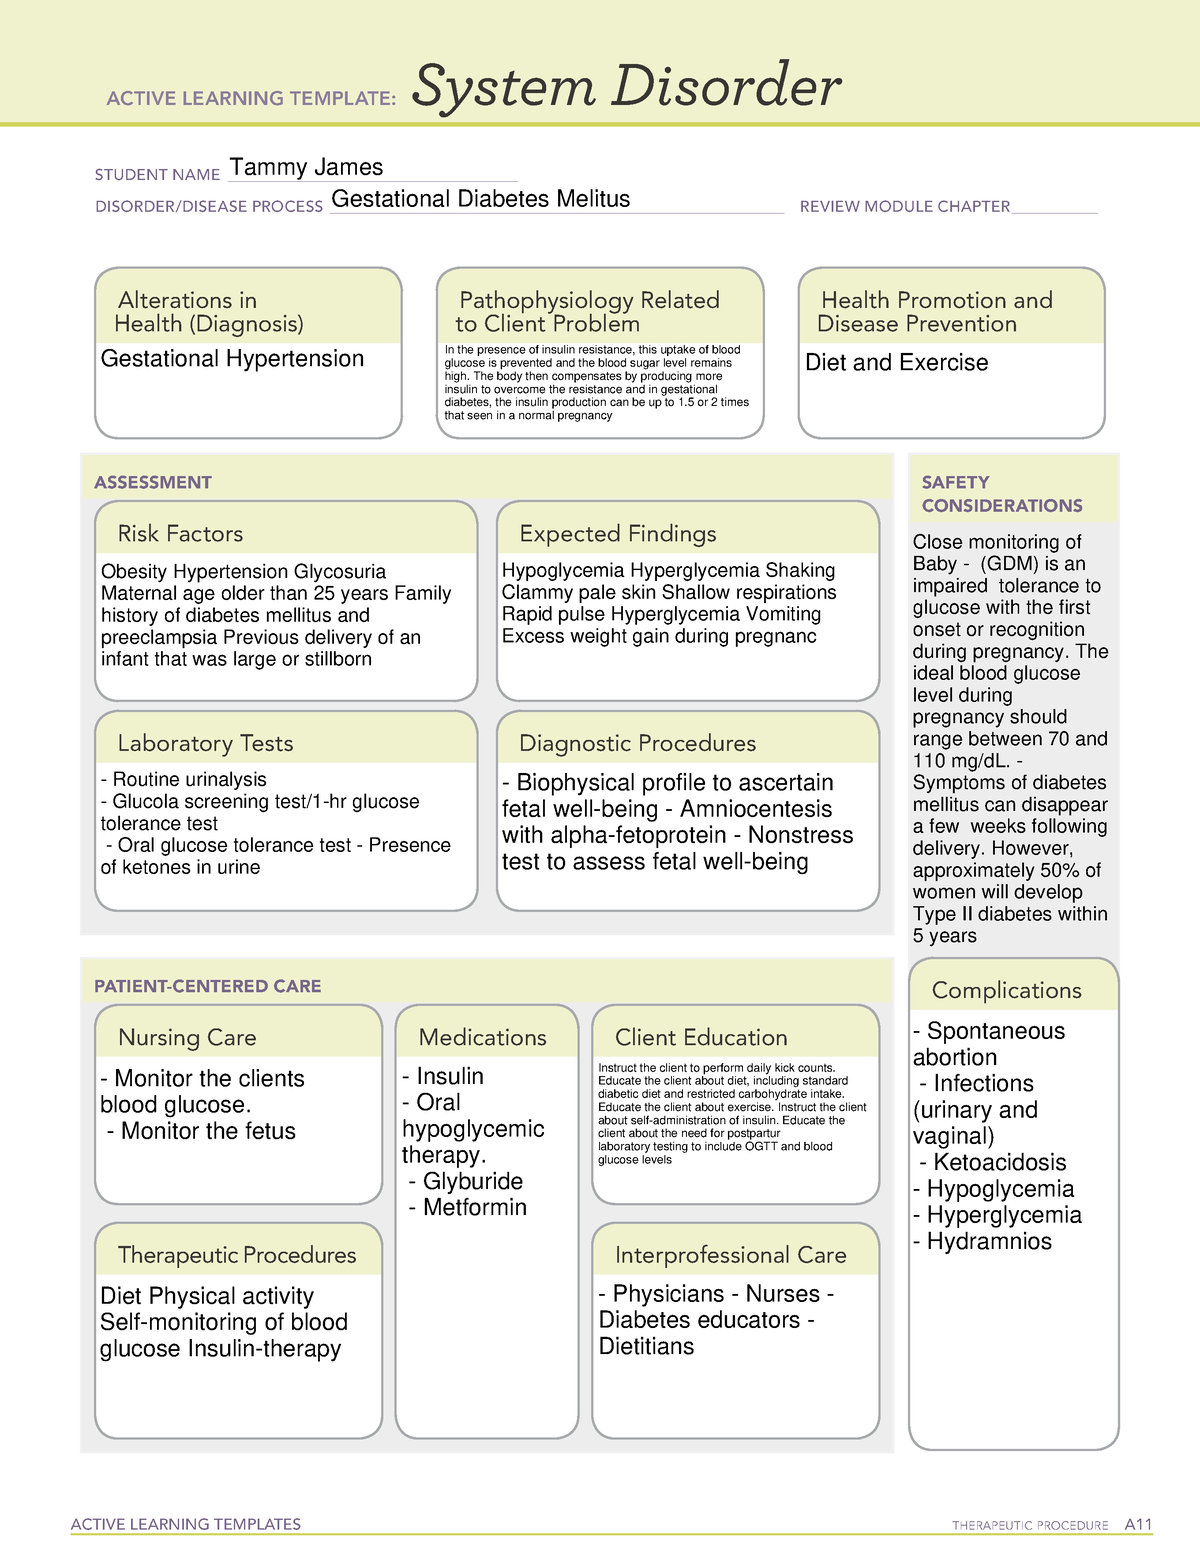 active-learning-template-gd-active-learning-templates-therapeutic